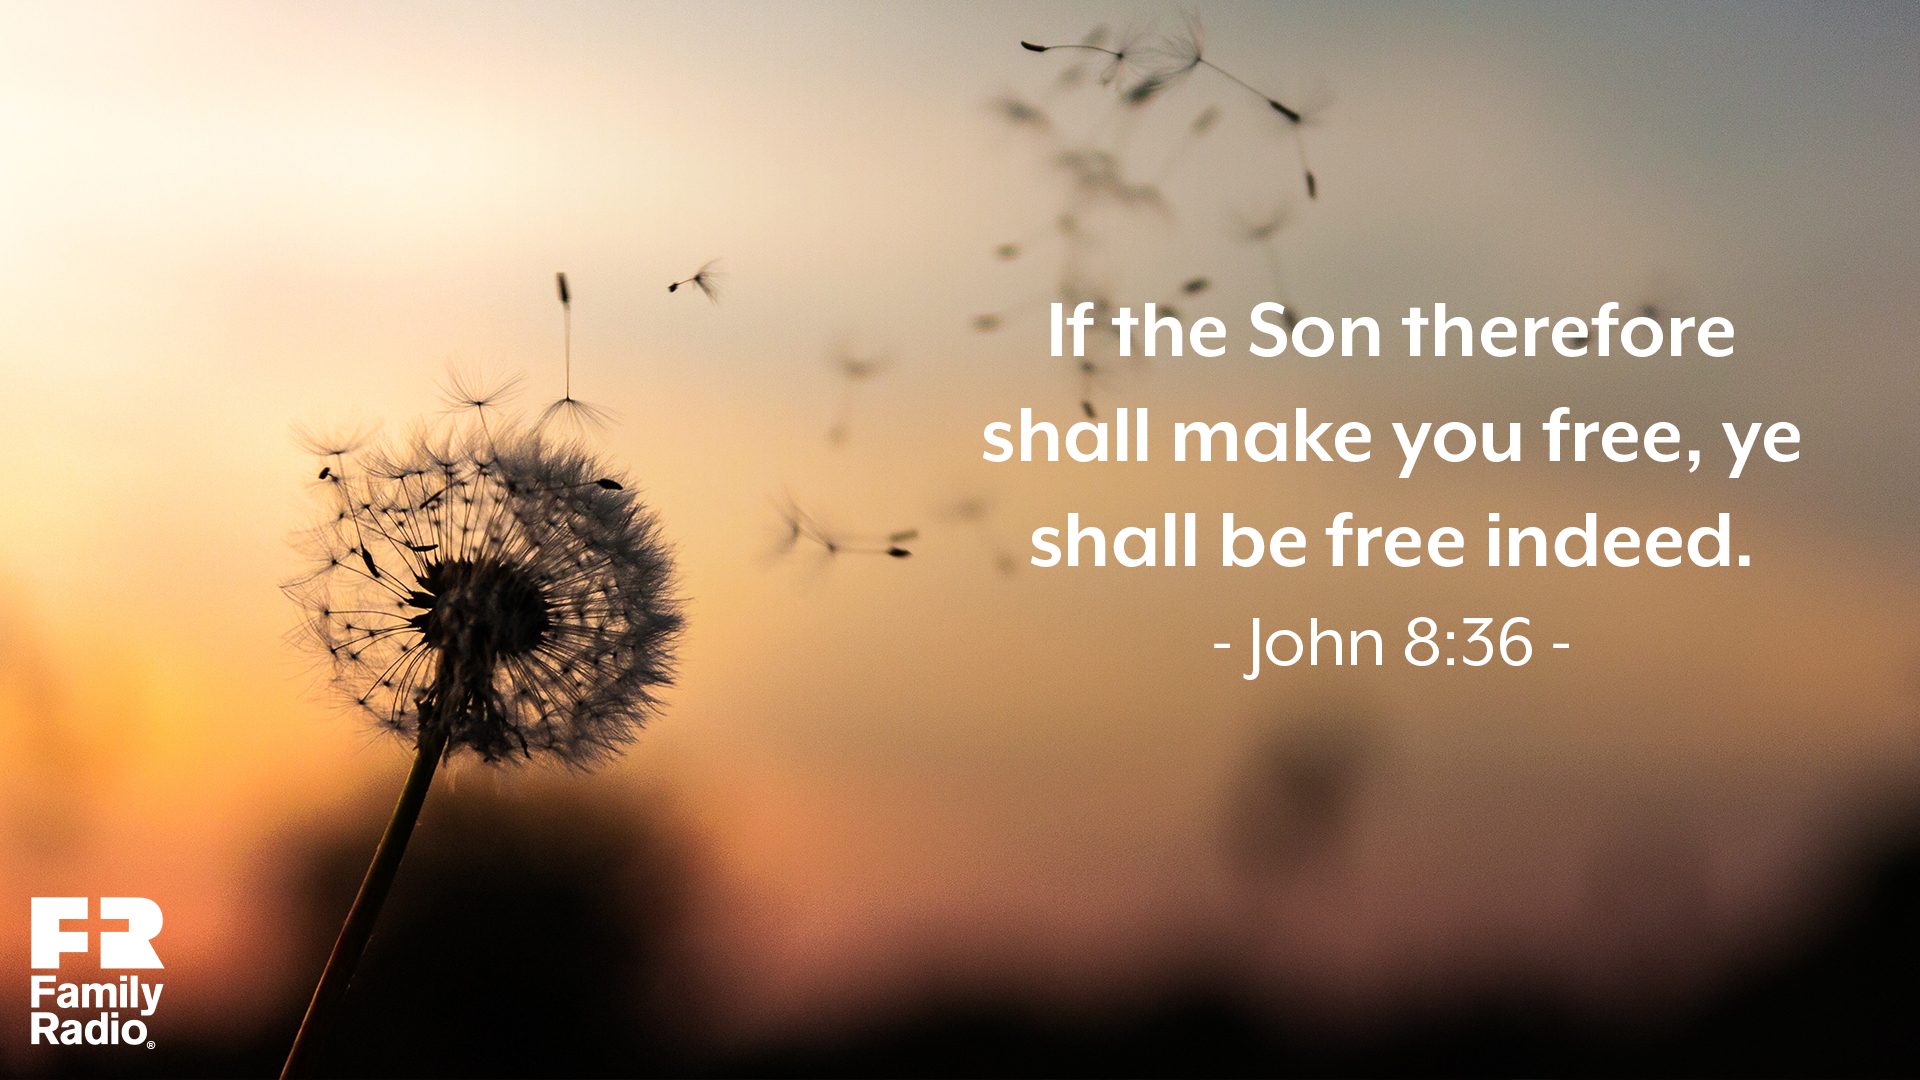 "If the Son therefore shall make you free, ye shall be free indeed."